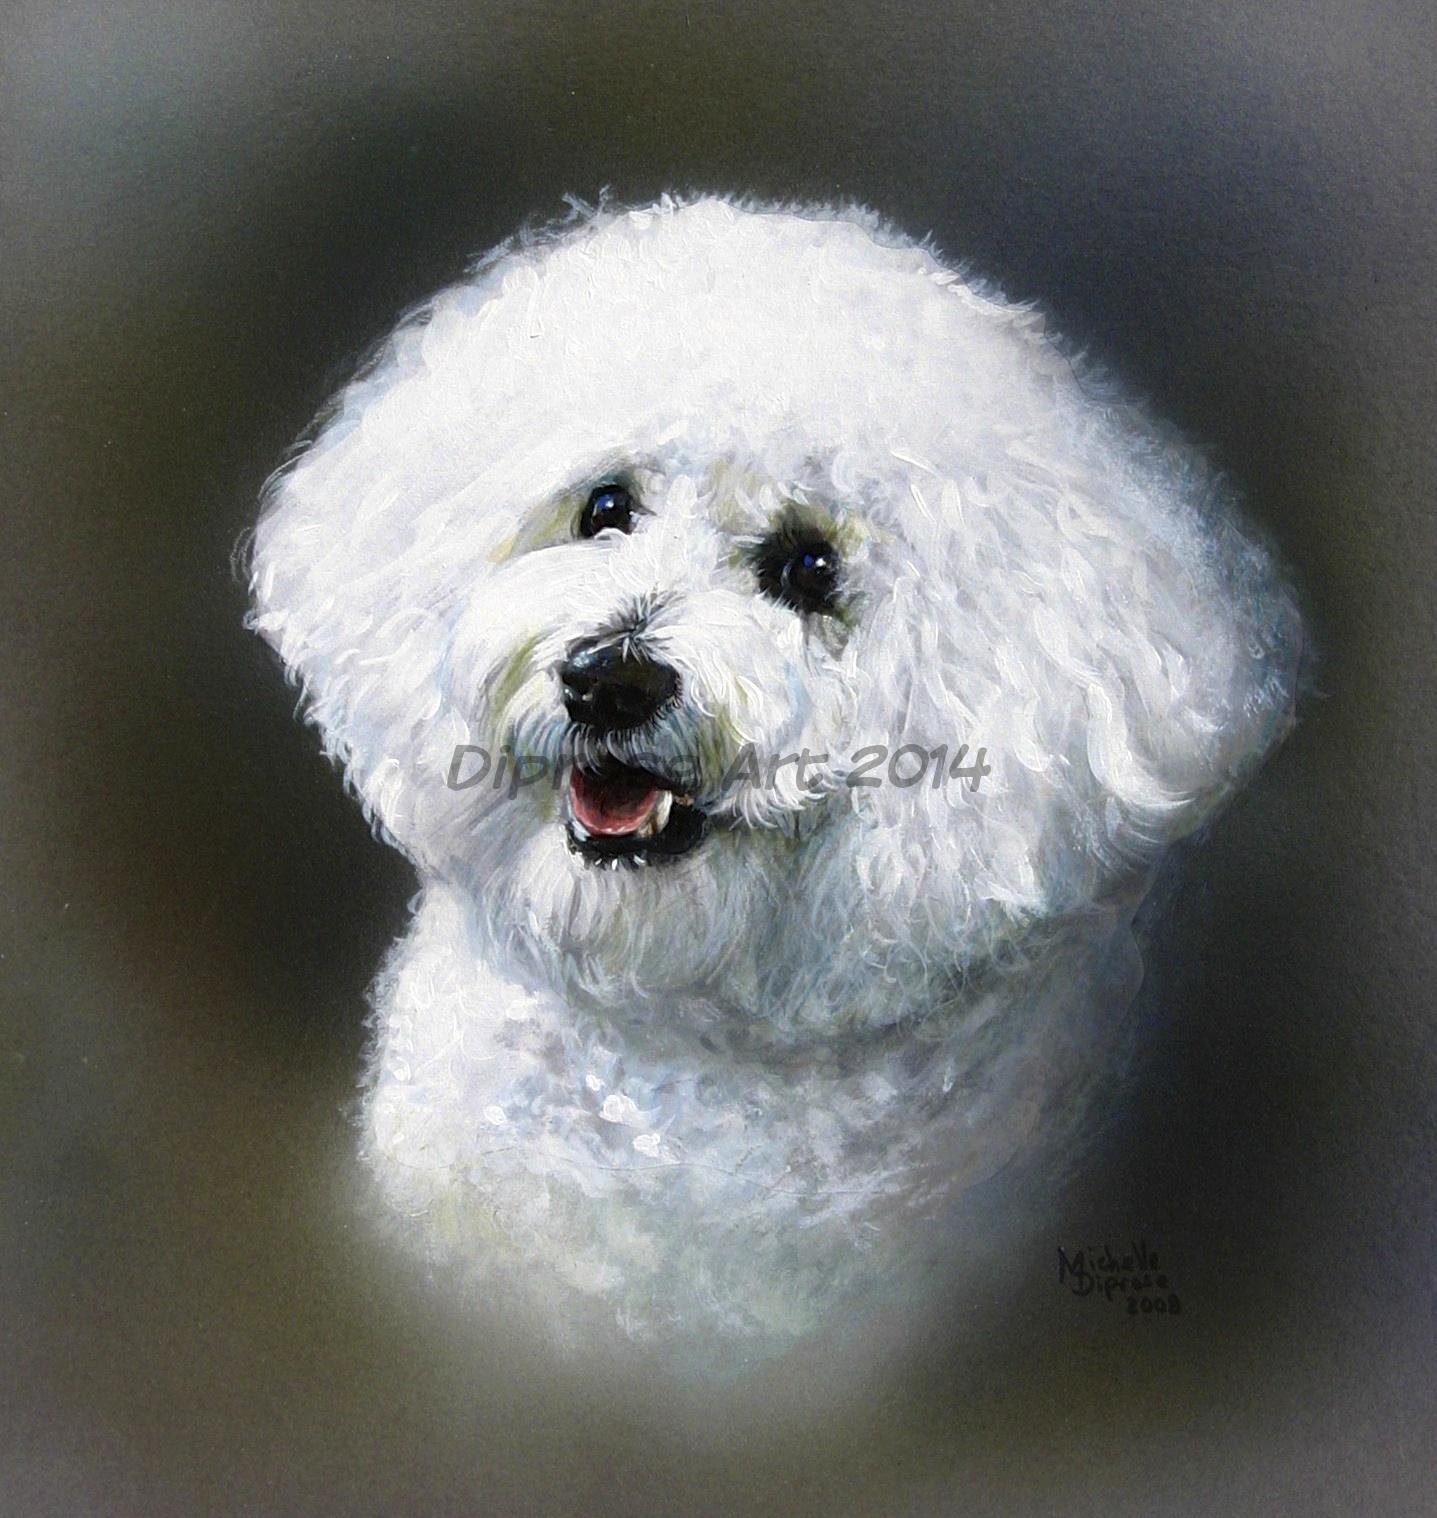 Acrylics on board - approx A4 - pet dog portrait - white is difficult to paint as it can end up looking dirty.  Fluff is also hard to portray.  Put them together in a Bichon and I hd my work cut out - I am really pleased with the result however!